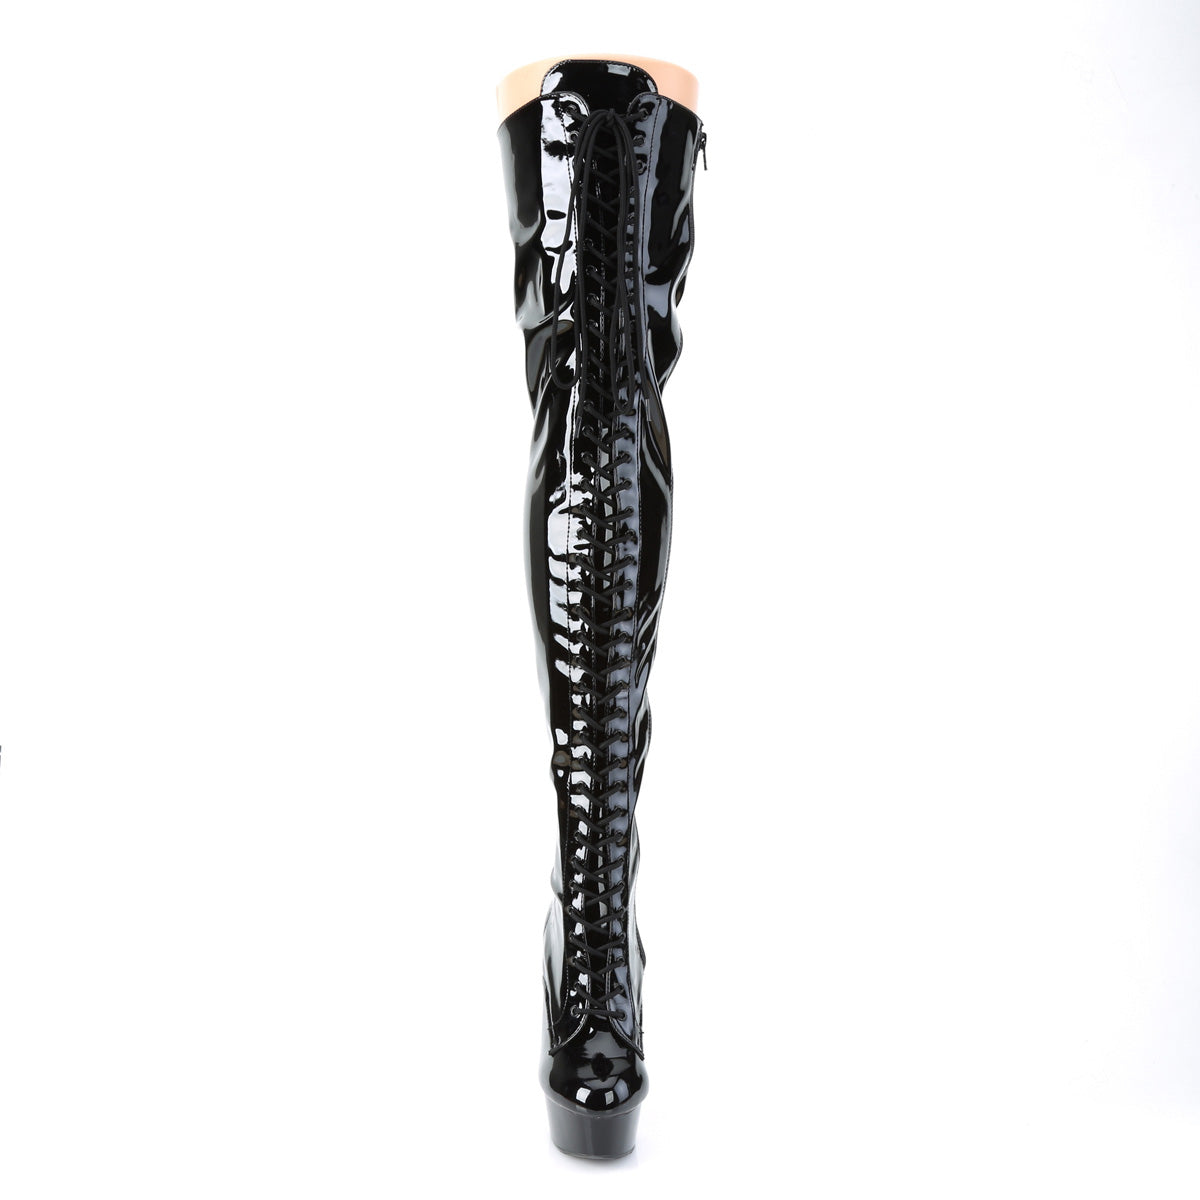 DELIGHT-3023 Black Thigh High Boots